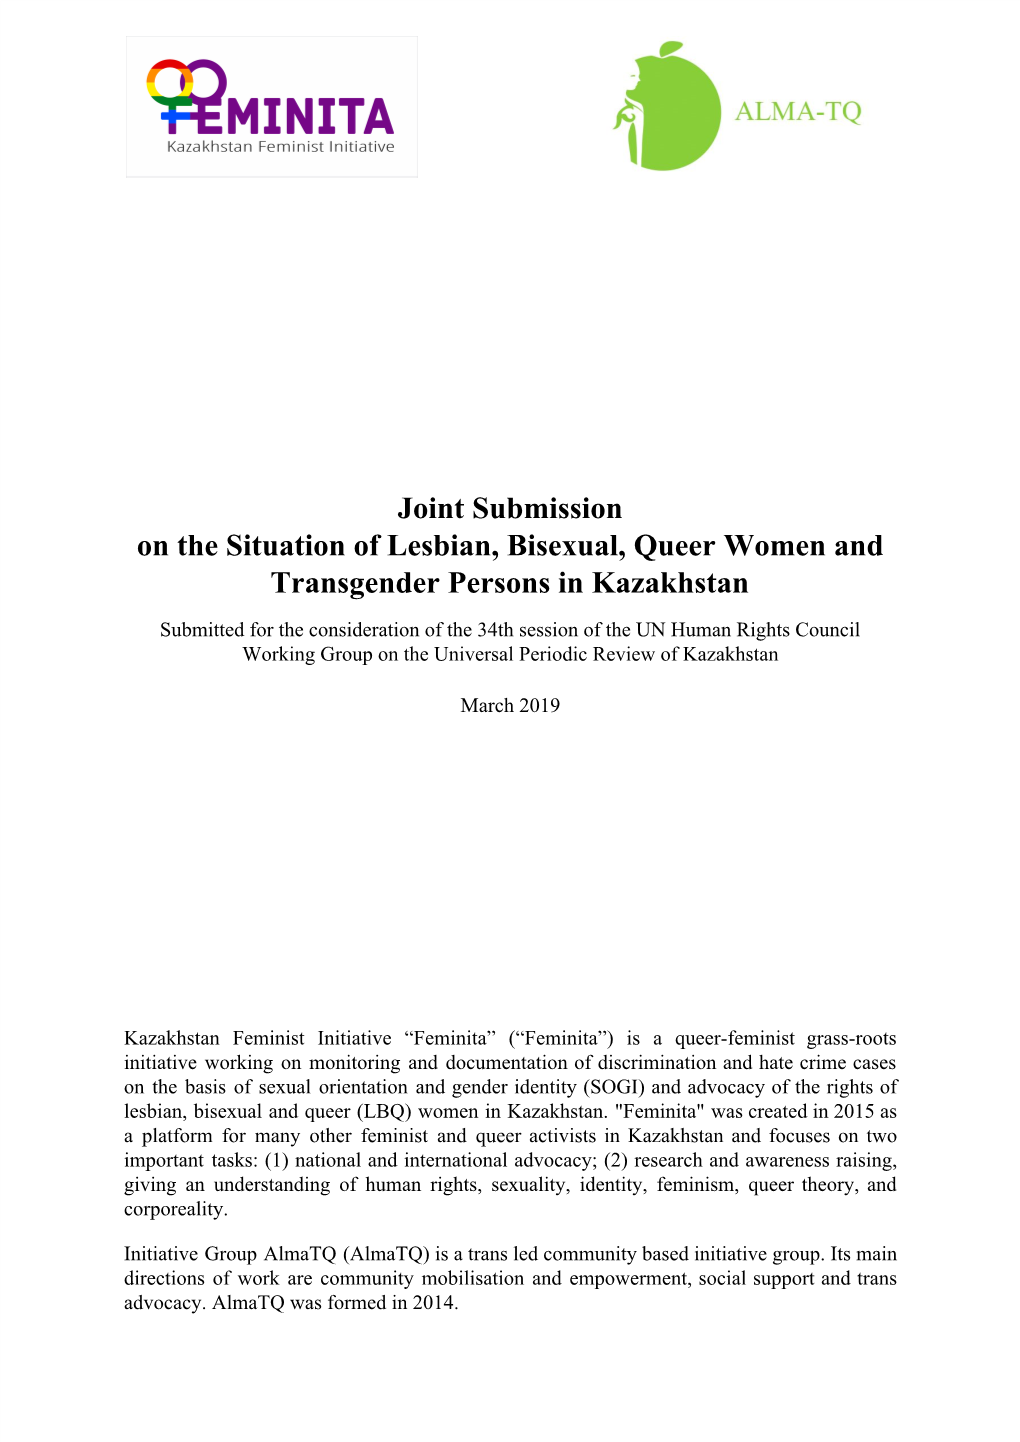 Joint Submission on the Situation of Lesbian, Bisexual, Queer Women and Transgender Persons in Kazakhstan